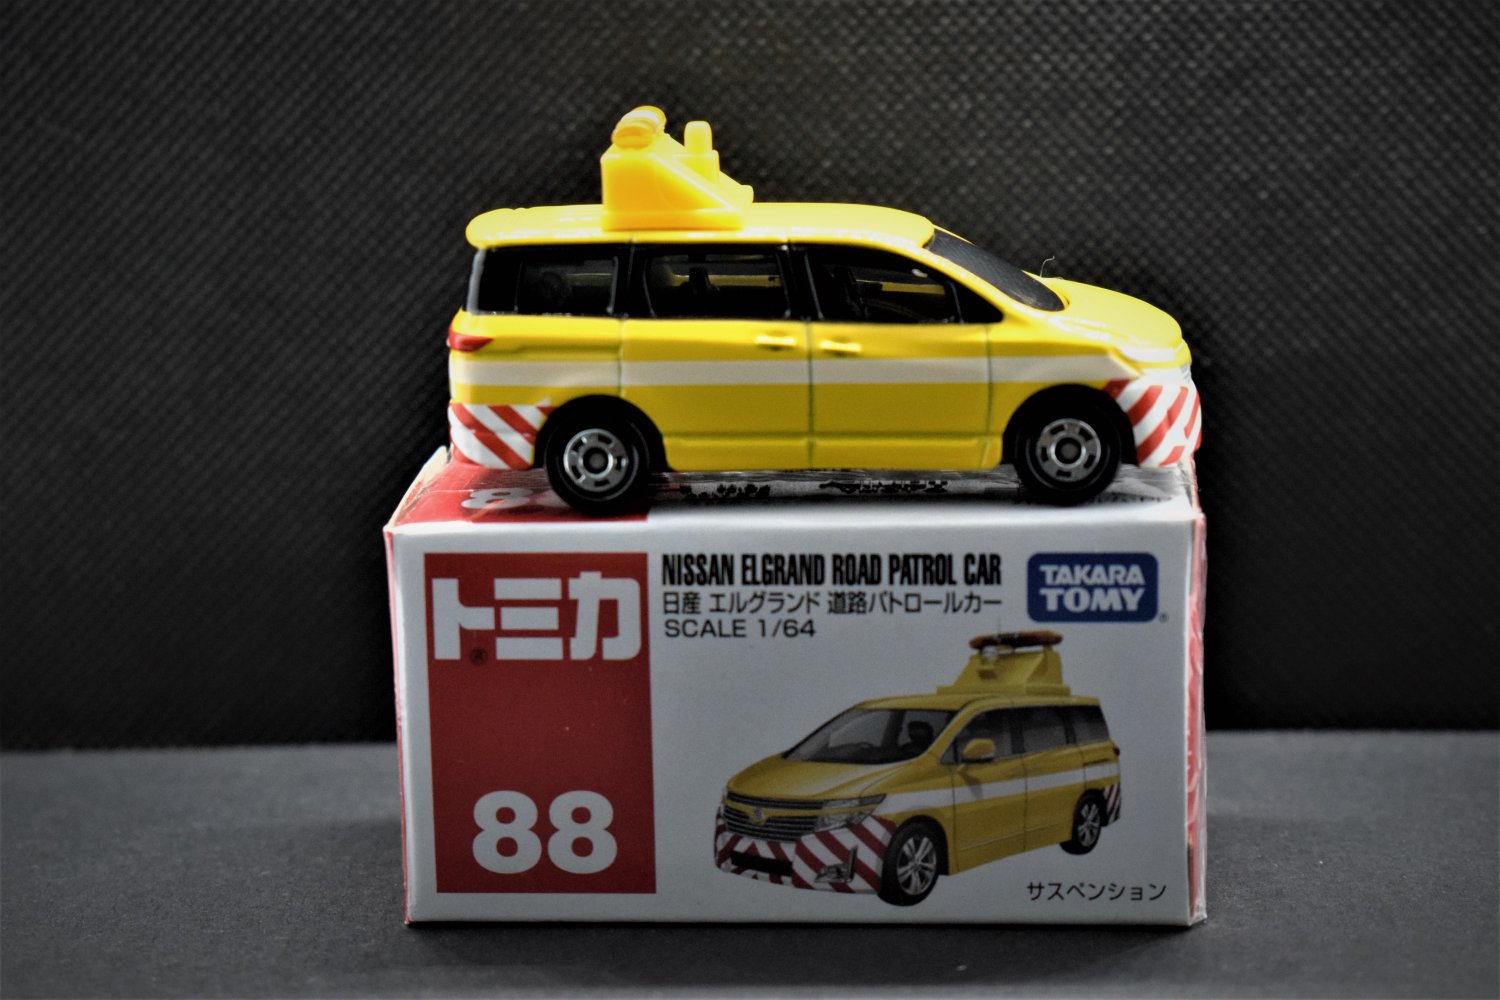 TOMICA #88 NISSAN ELGRAND ROAD PATROL CAR 1:64 SCALE NEW IN BOX 